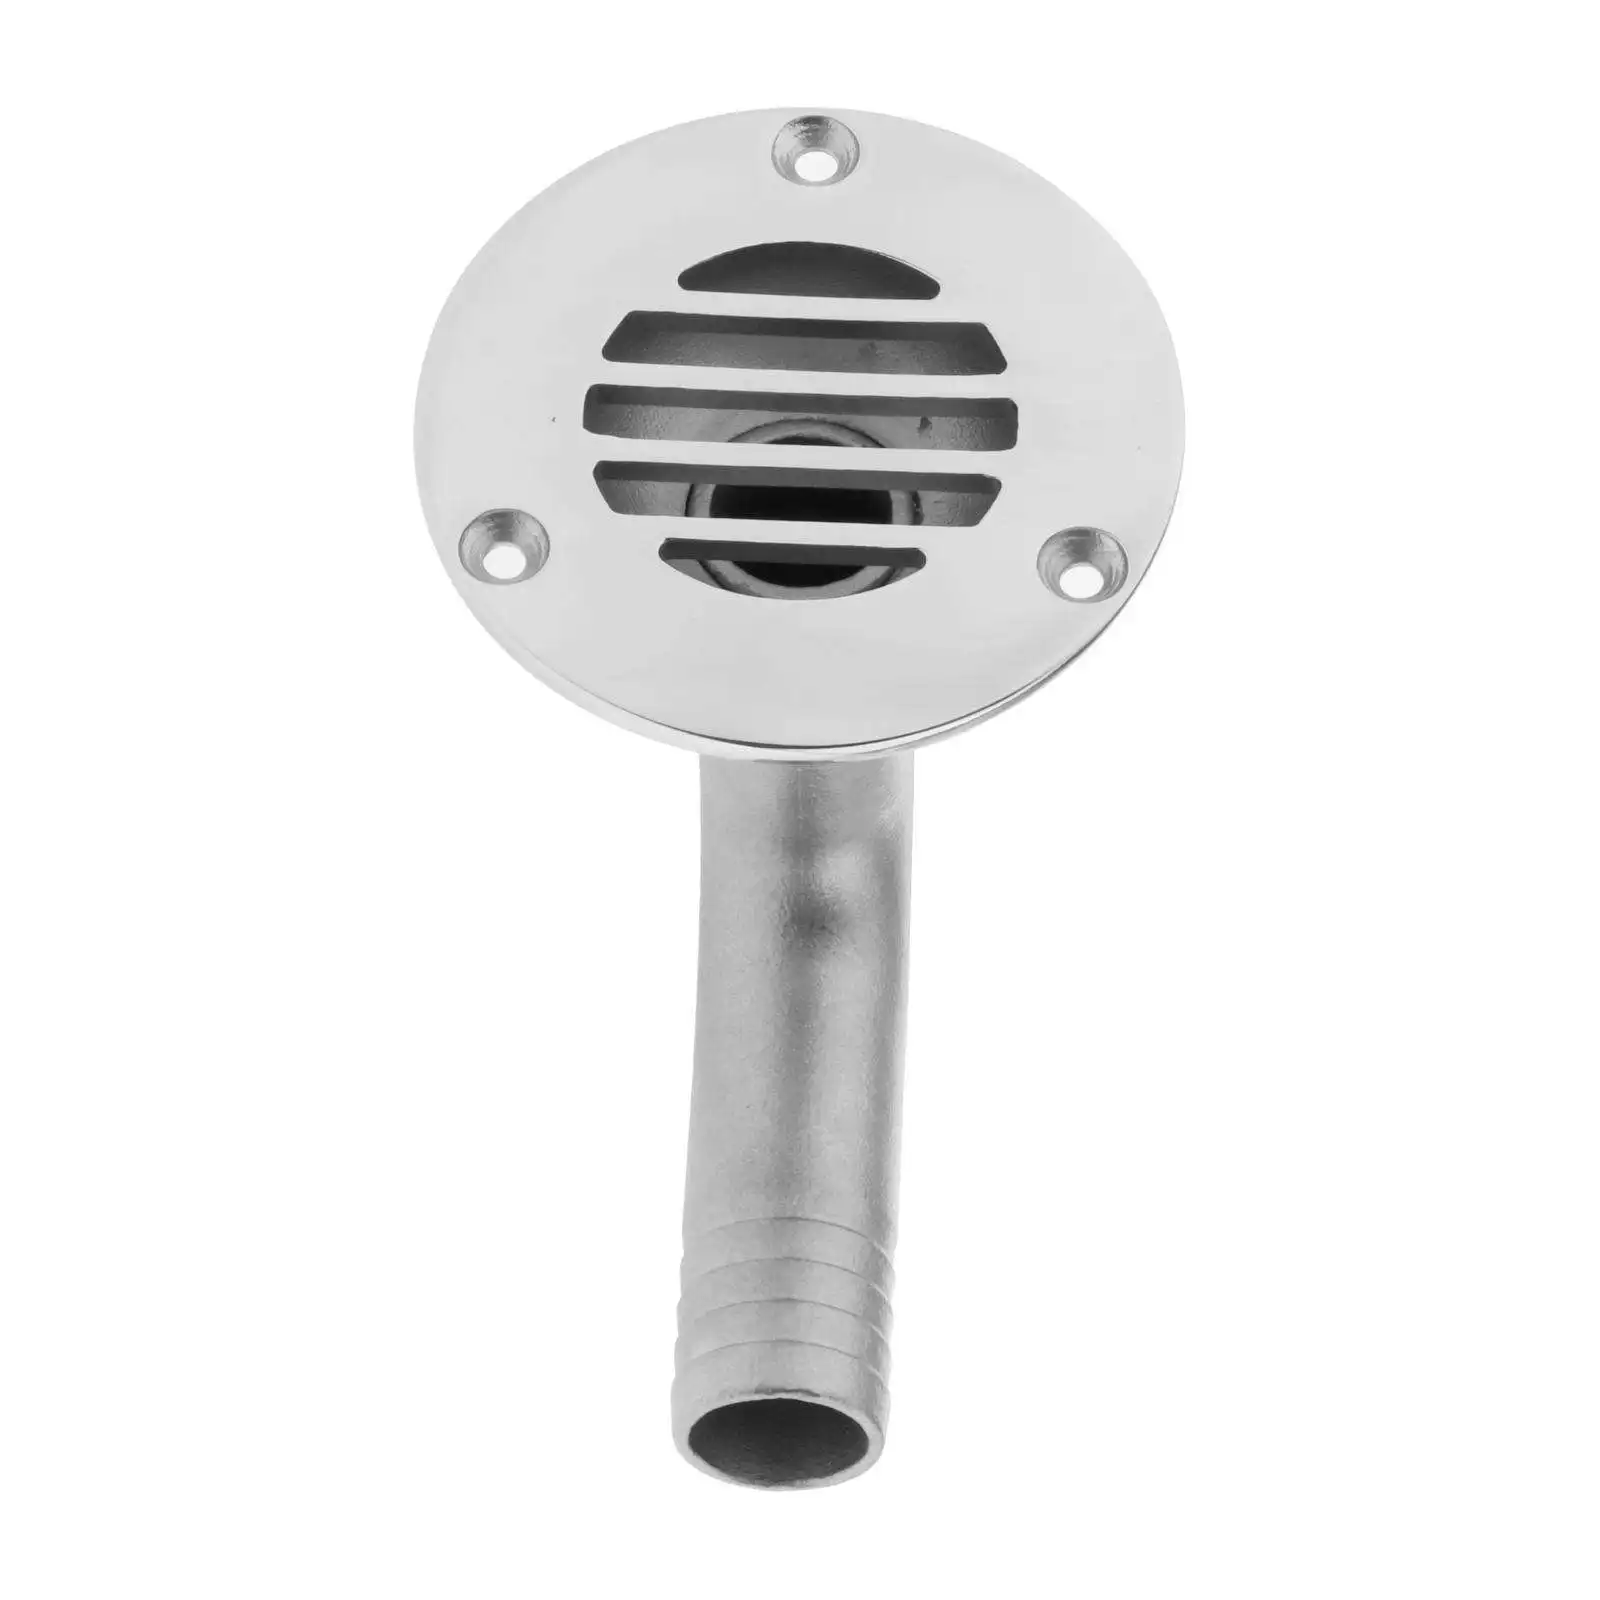 

Deck Floor Drain Scupper - Marine Grade Stainless Steel - for Boat & Fishing Ship - 3/4 inch, Easy to Install